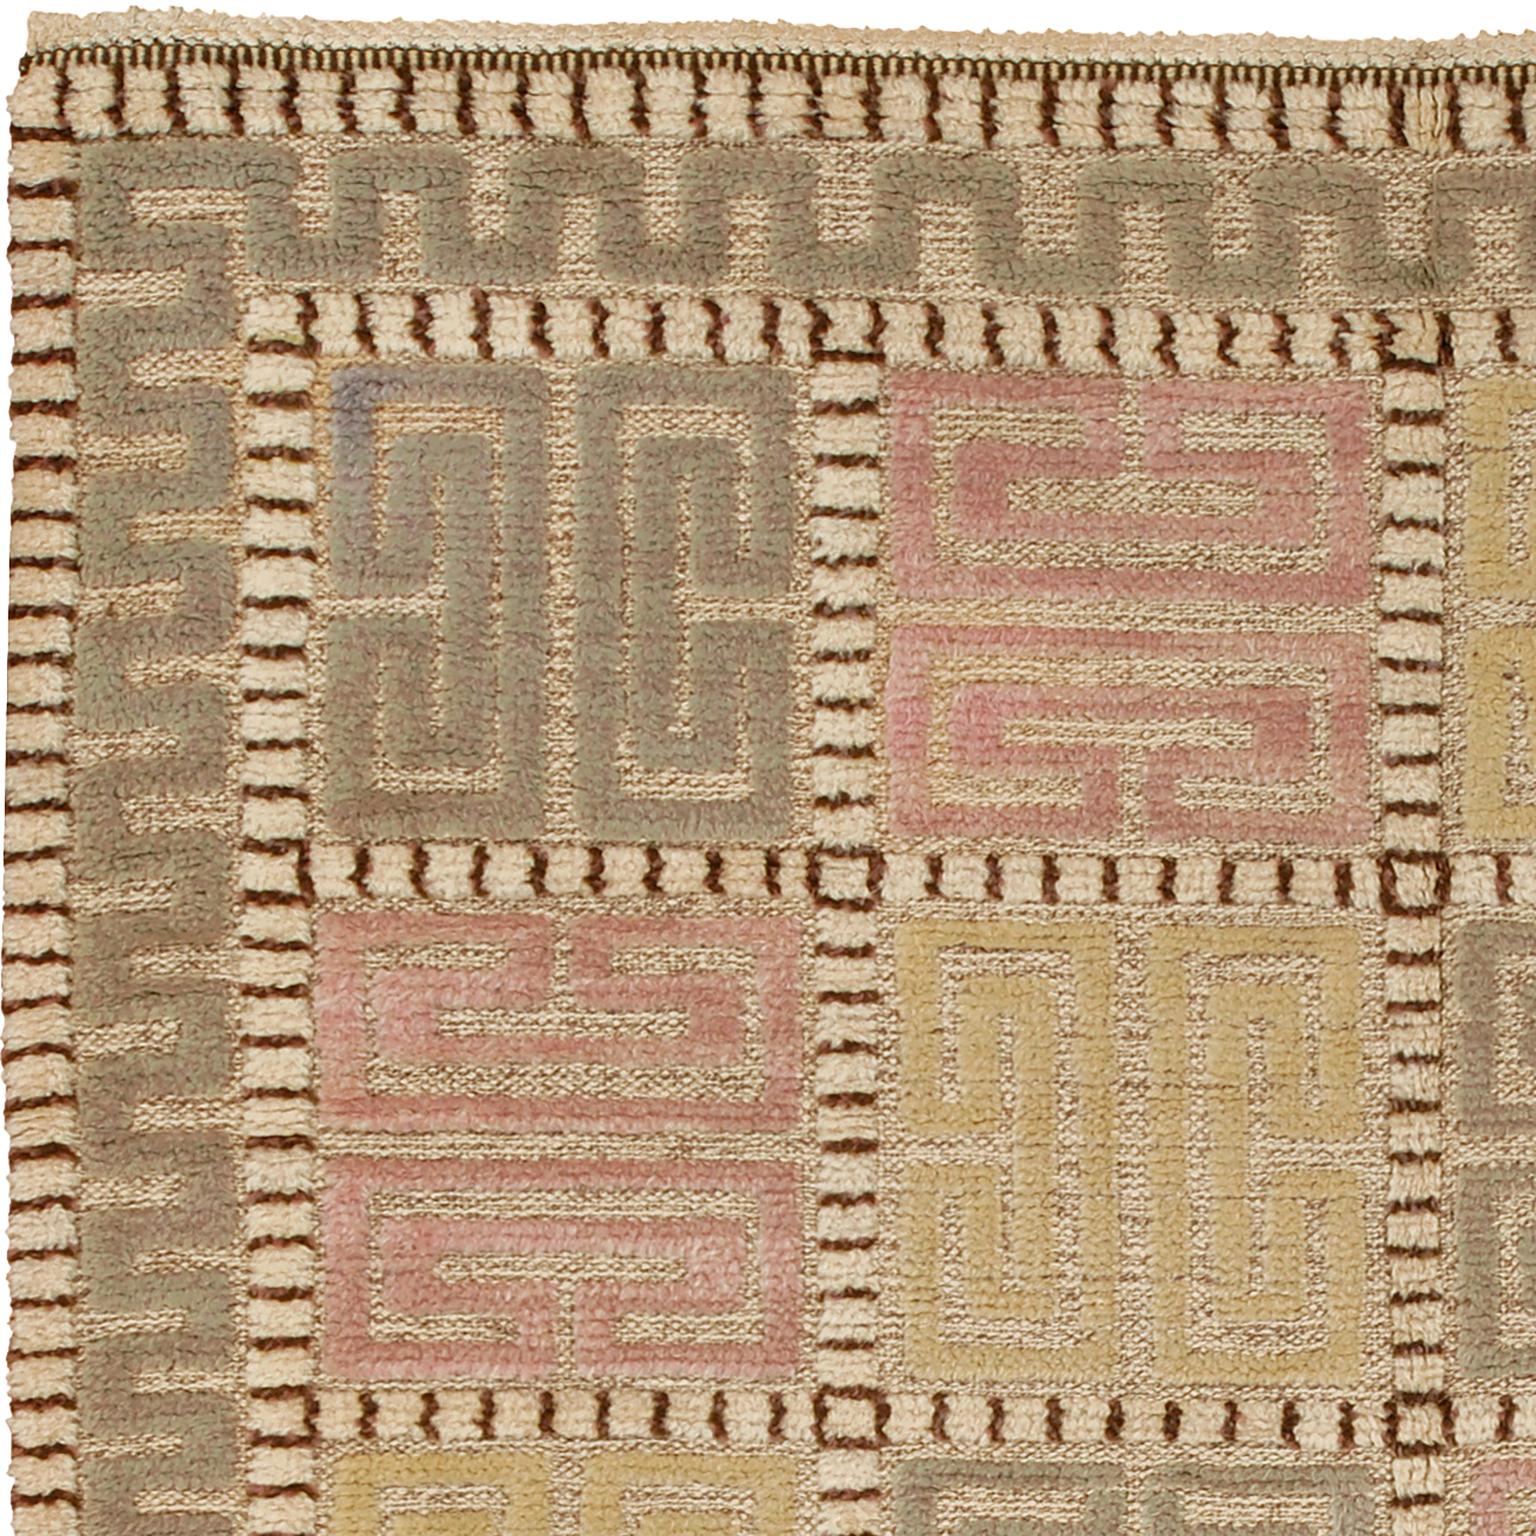 Sweden ca. 1940
Signed 'AB MMF' (Märta Måås-Fjetterström Workshop )
Handwoven with pile technique
Featuring a cream background, with yellow, pink and green pile motifs and a striped border.
7'1